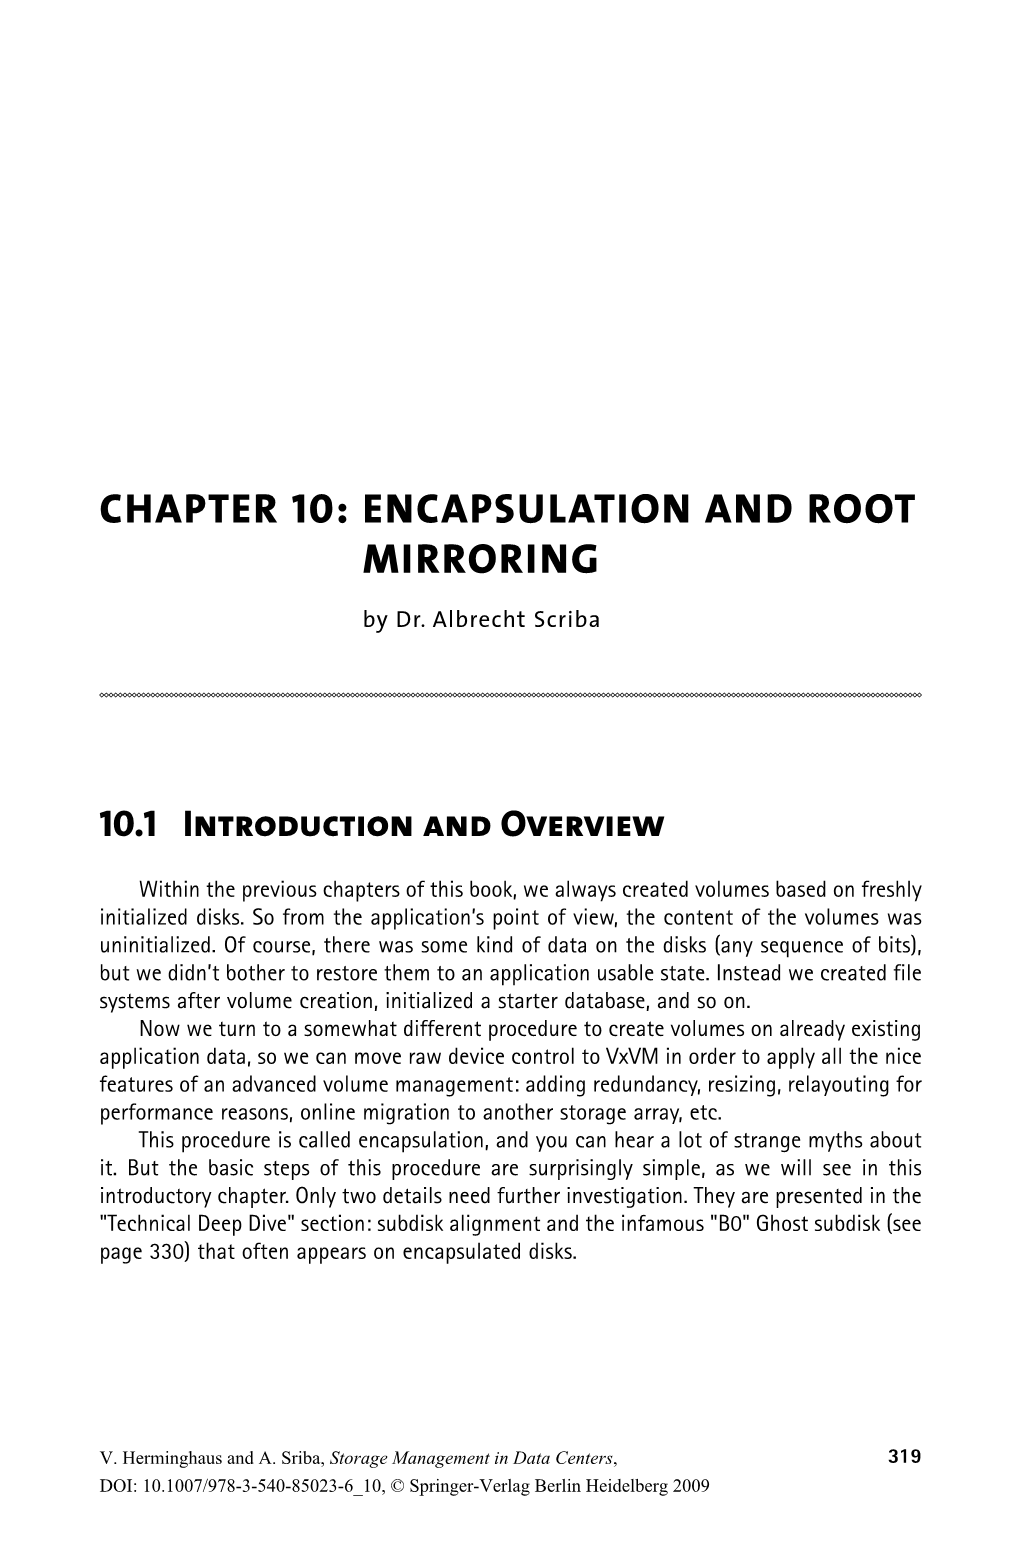 Chapter 10: Encapsulation and Root Mirroring by Dr